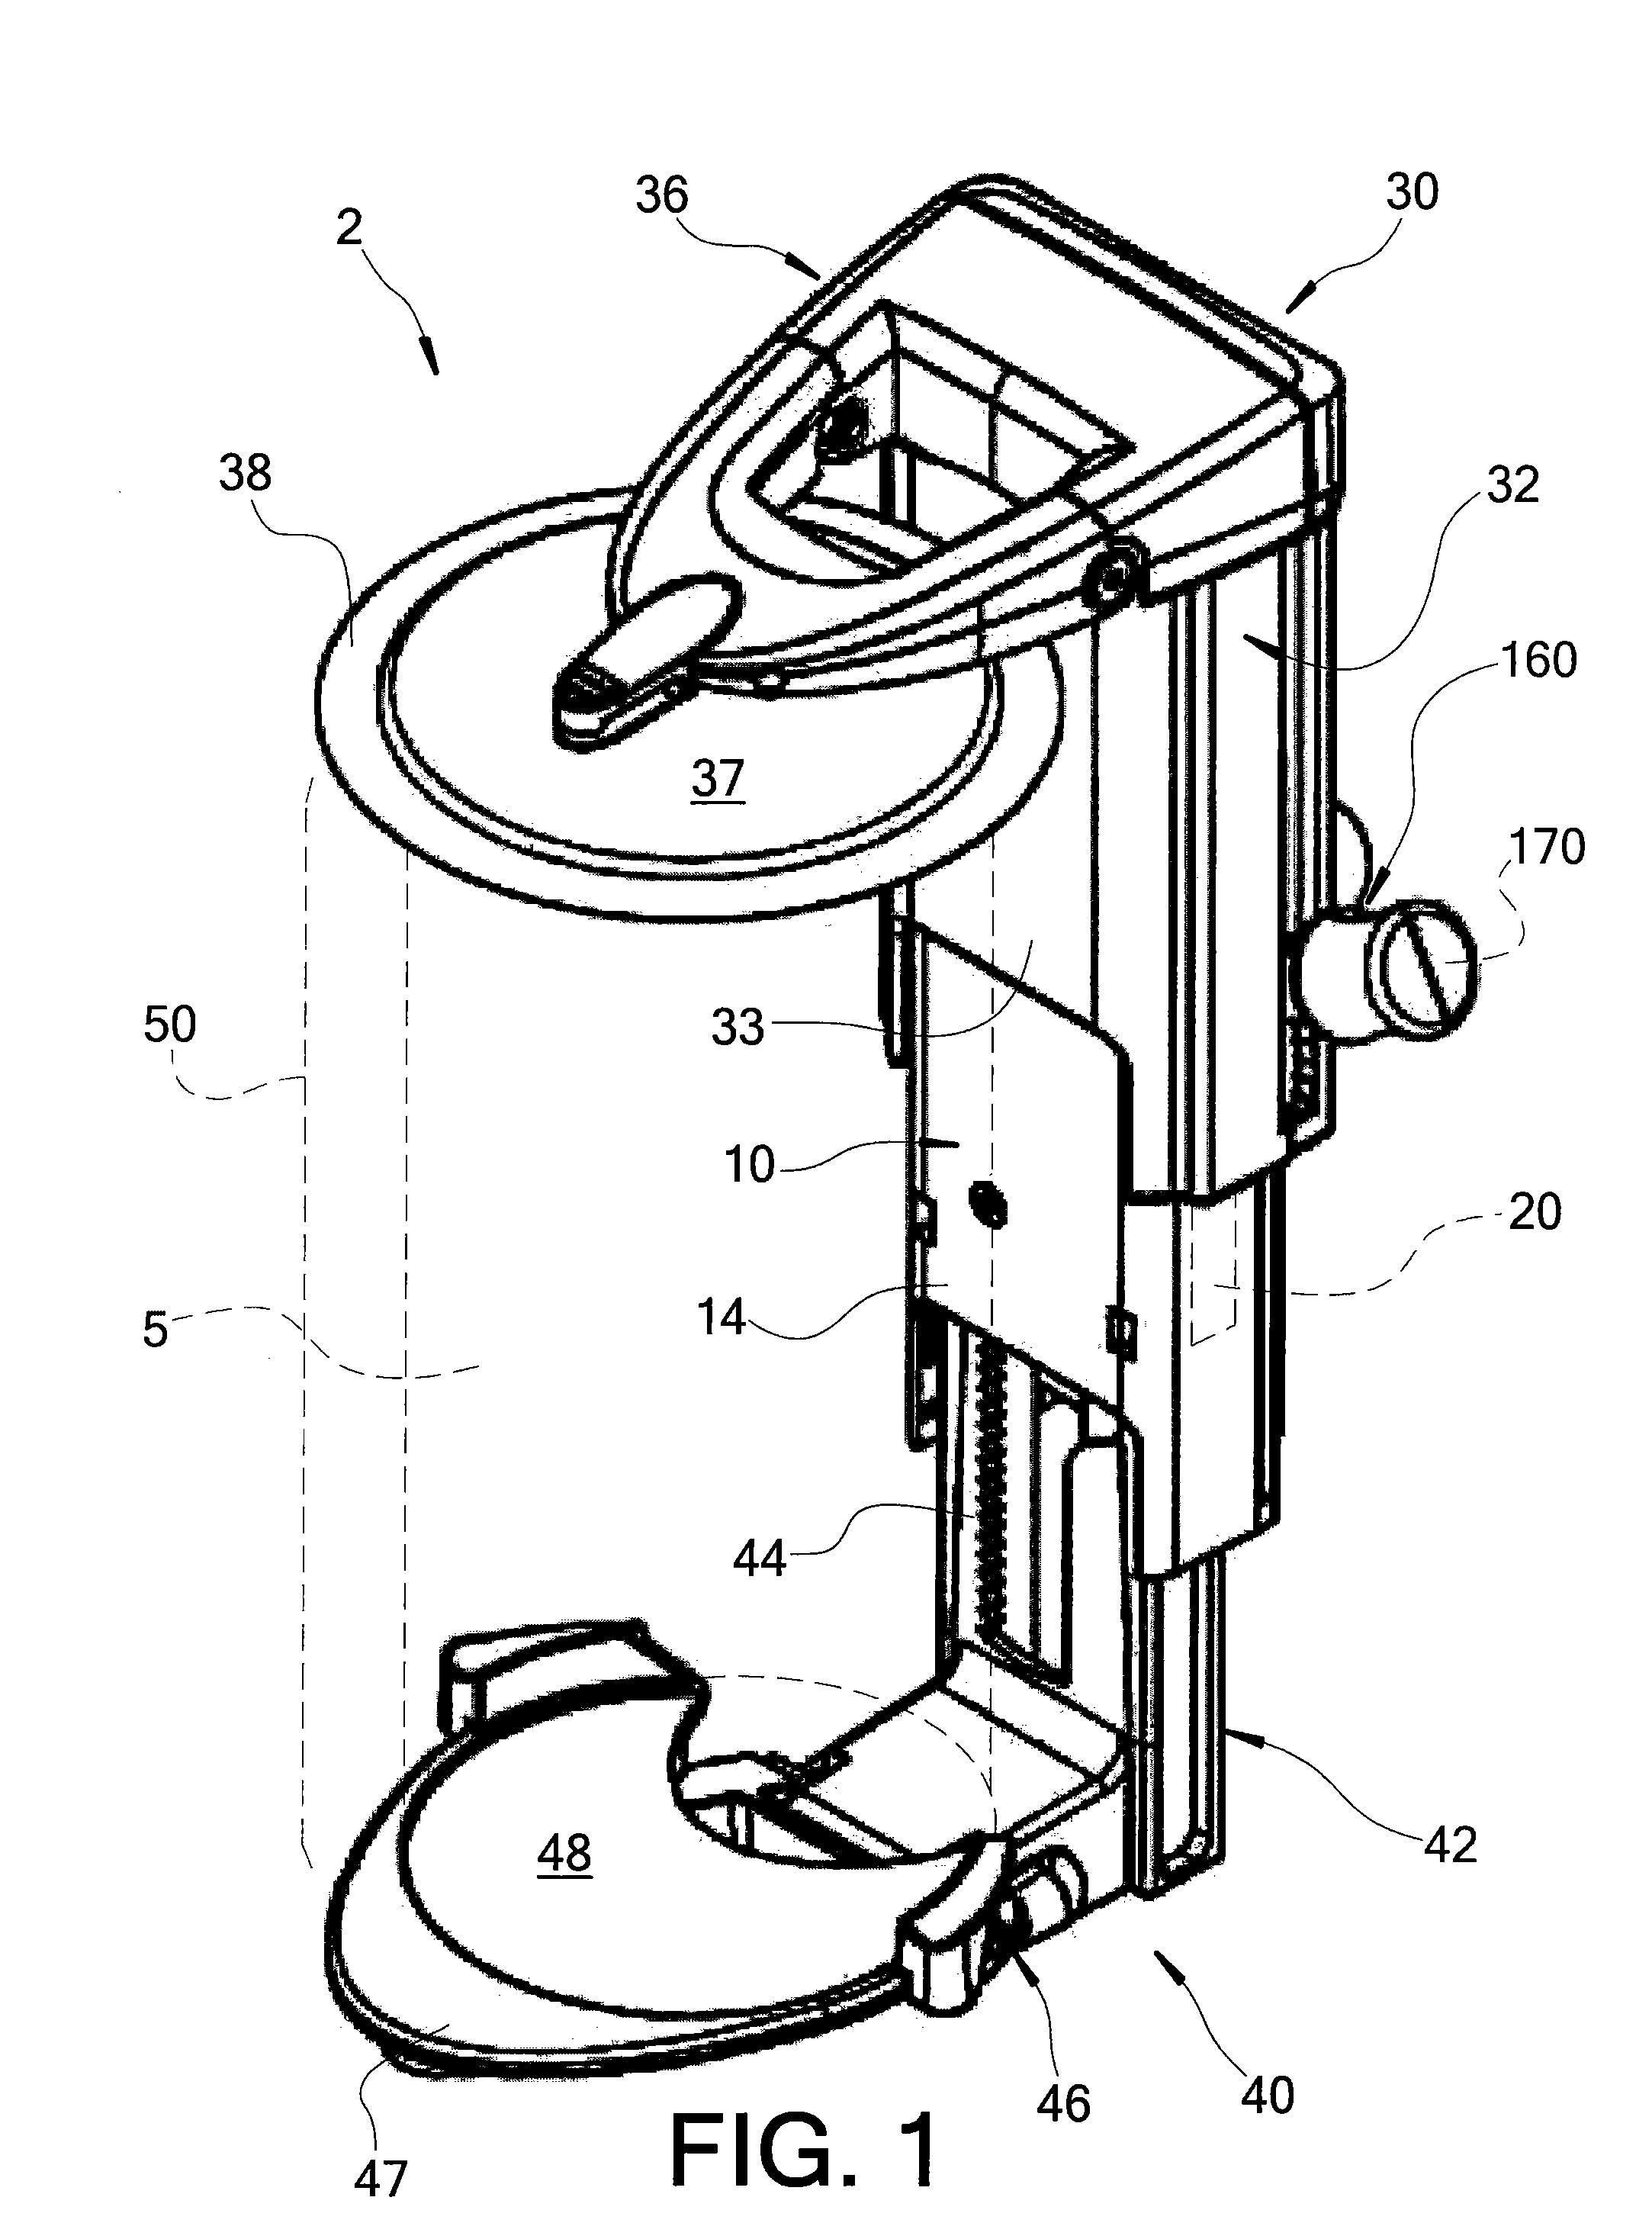 Holder for Beverage Containers